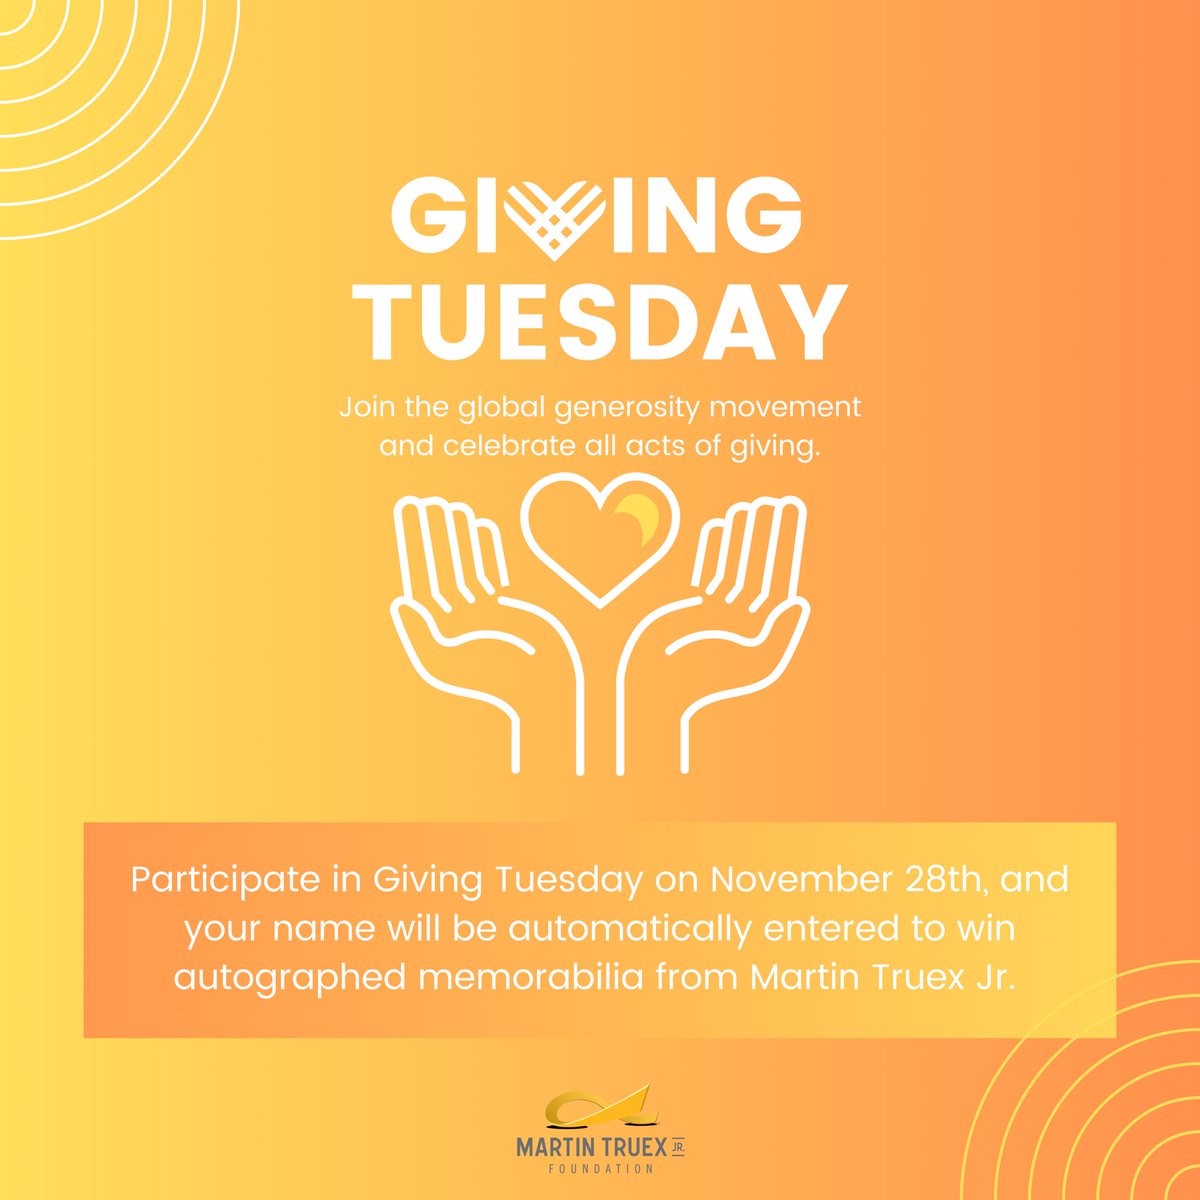 It’s #givingtuesday 💛 Your donation will go a long way to help a child diagnosed with cancer! To donate: app.donorview.com/goZw We’ll be randomly selecting donors throughout the day to win autographed memorabilia from MTJ himself! #givingtuesdaynow #givingtuesday2023